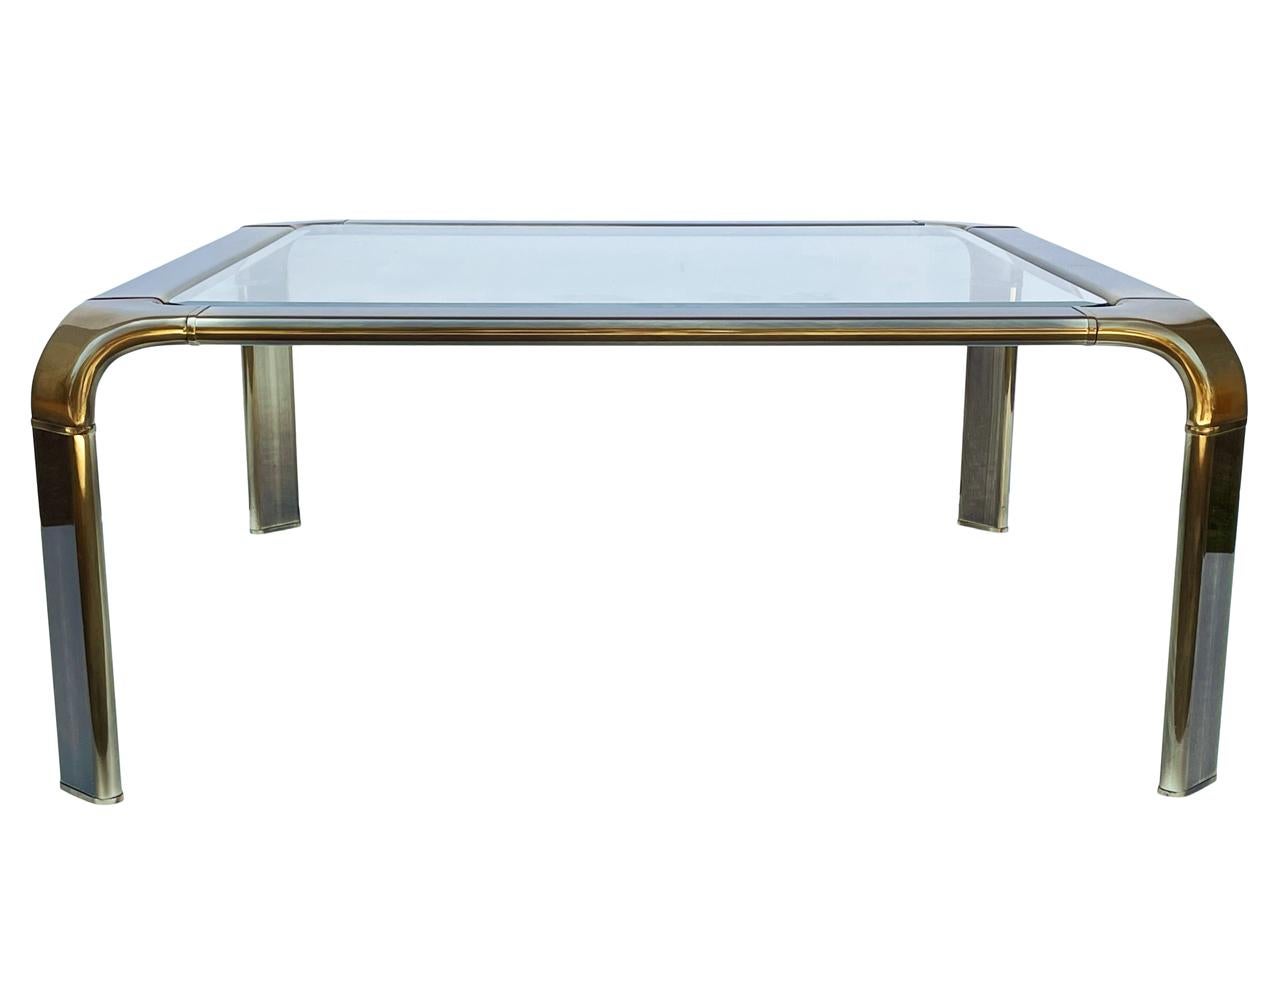 Midcentury Hollywood Regency John Widdicomb Brass/Glass Square Cocktail Table In Good Condition For Sale In Philadelphia, PA